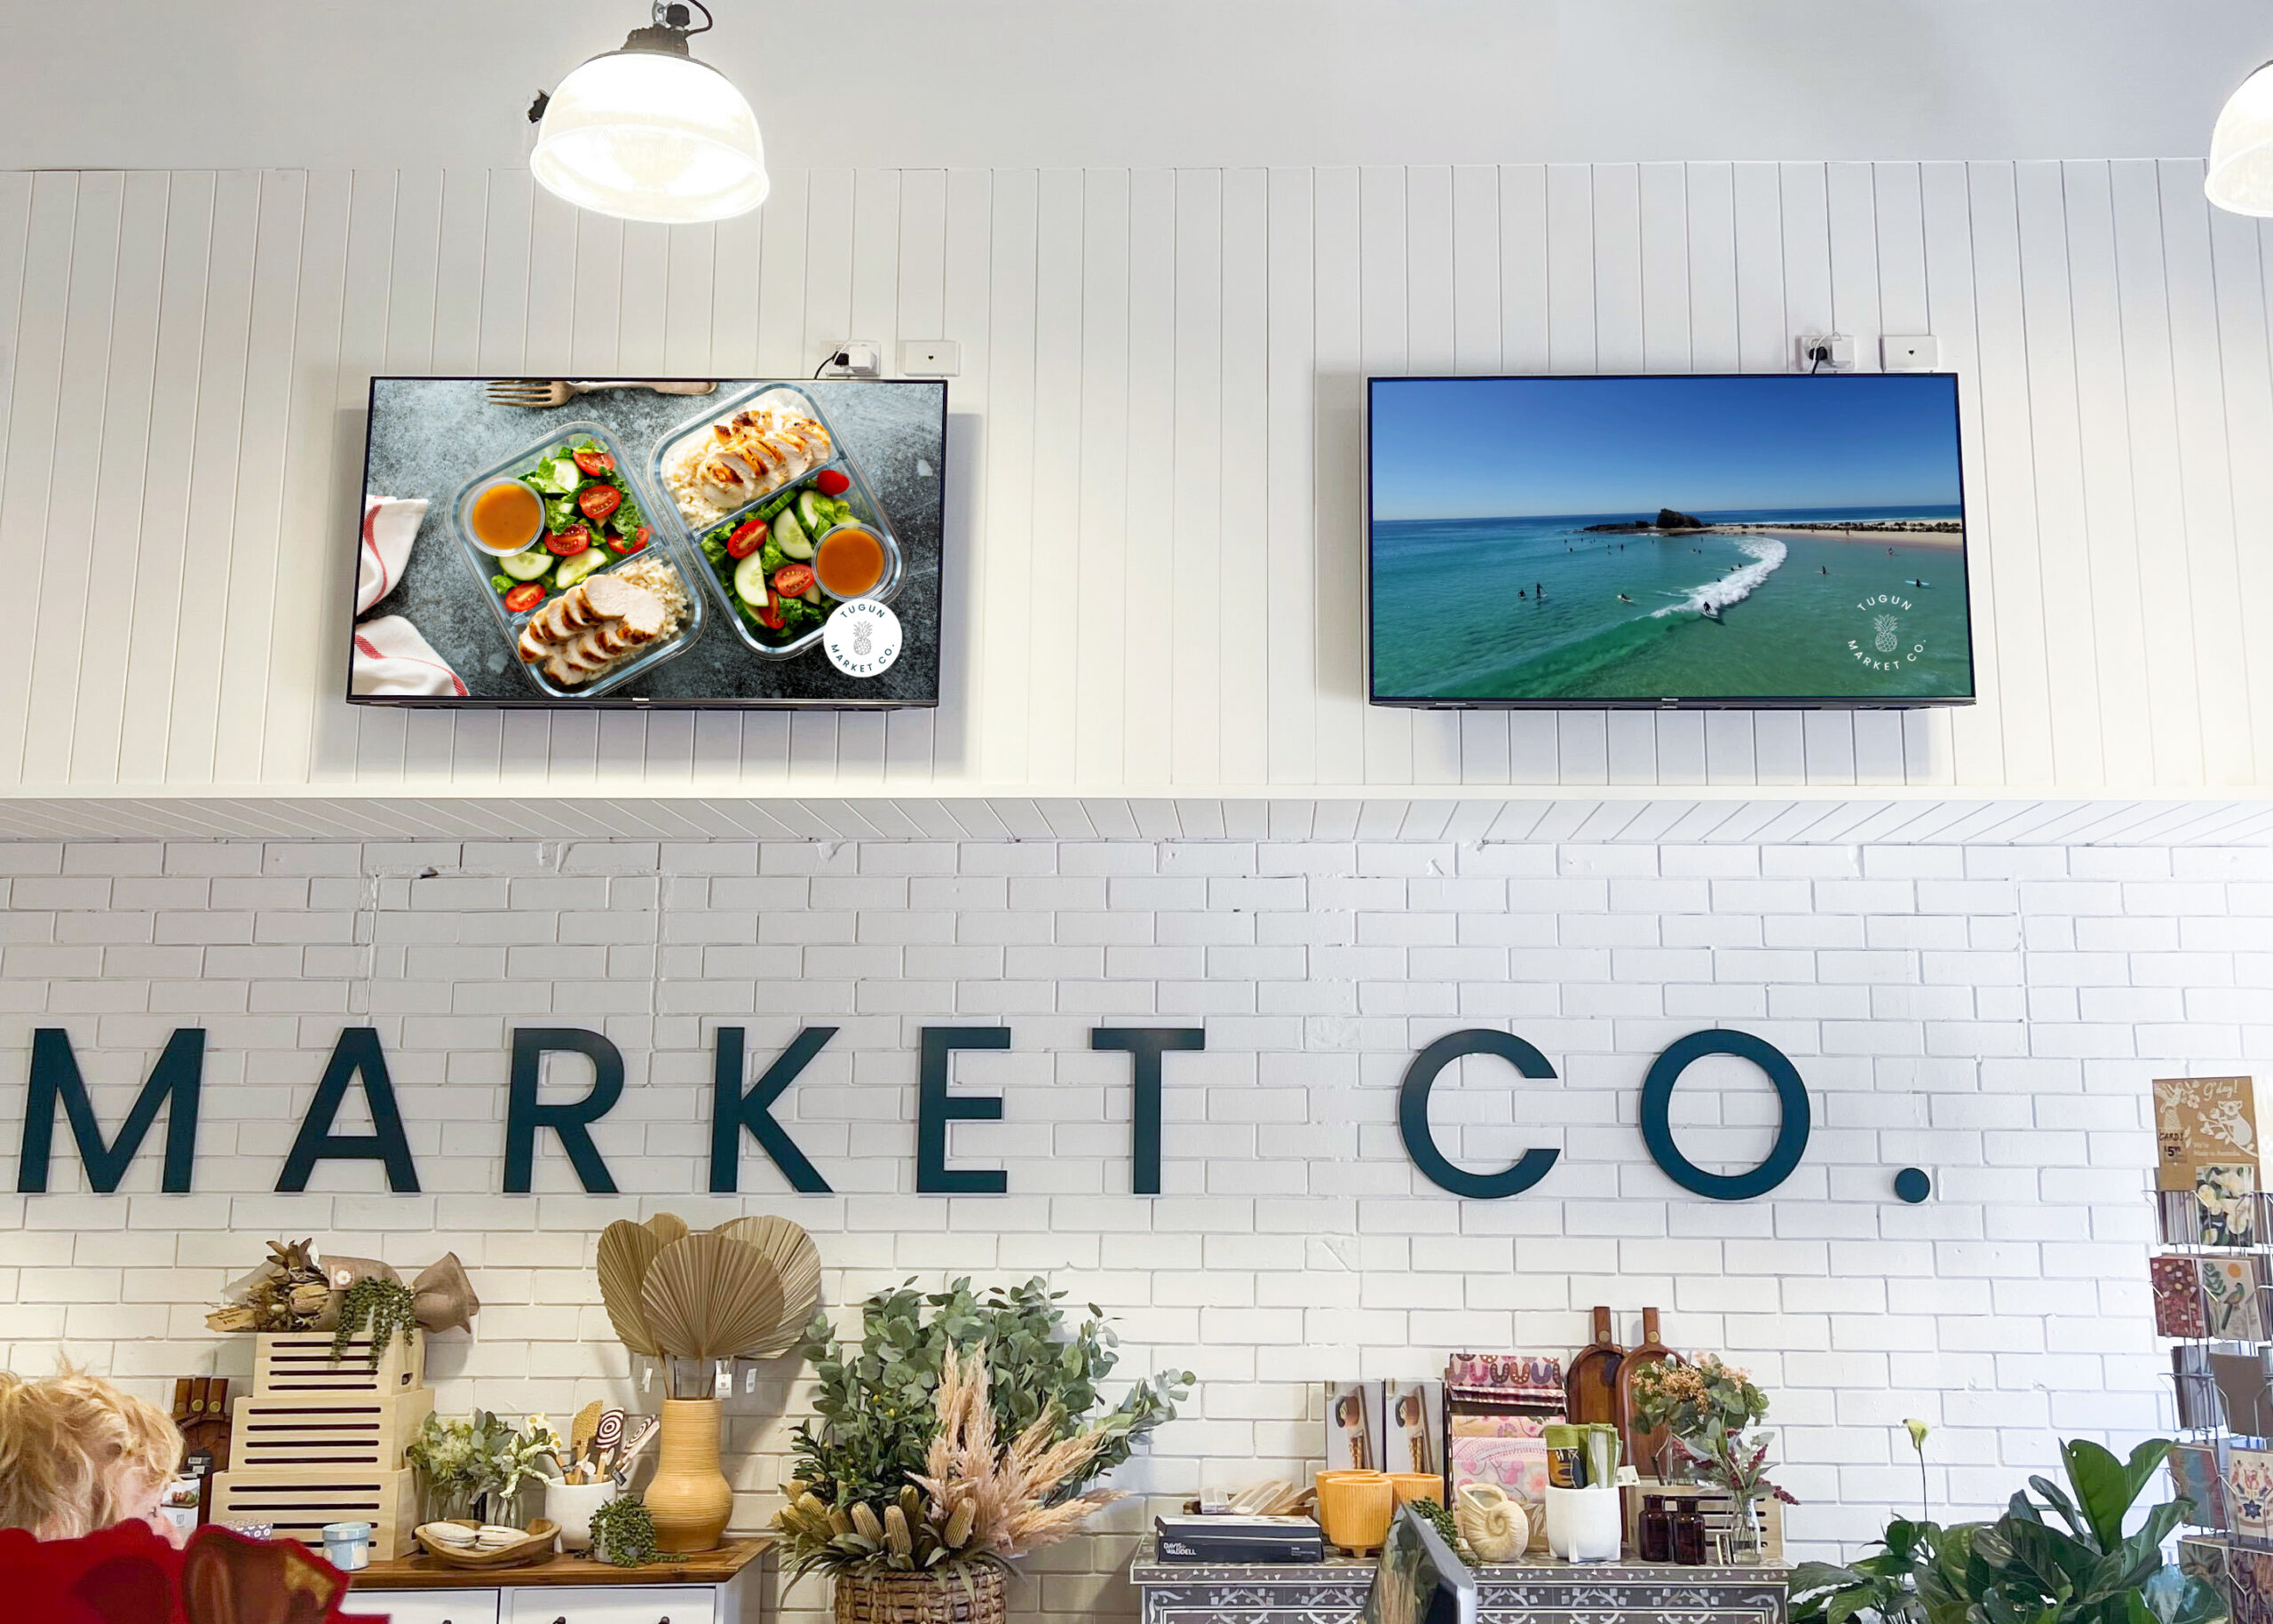 Featured image for “New In Store Signage at Tugun Market Co”